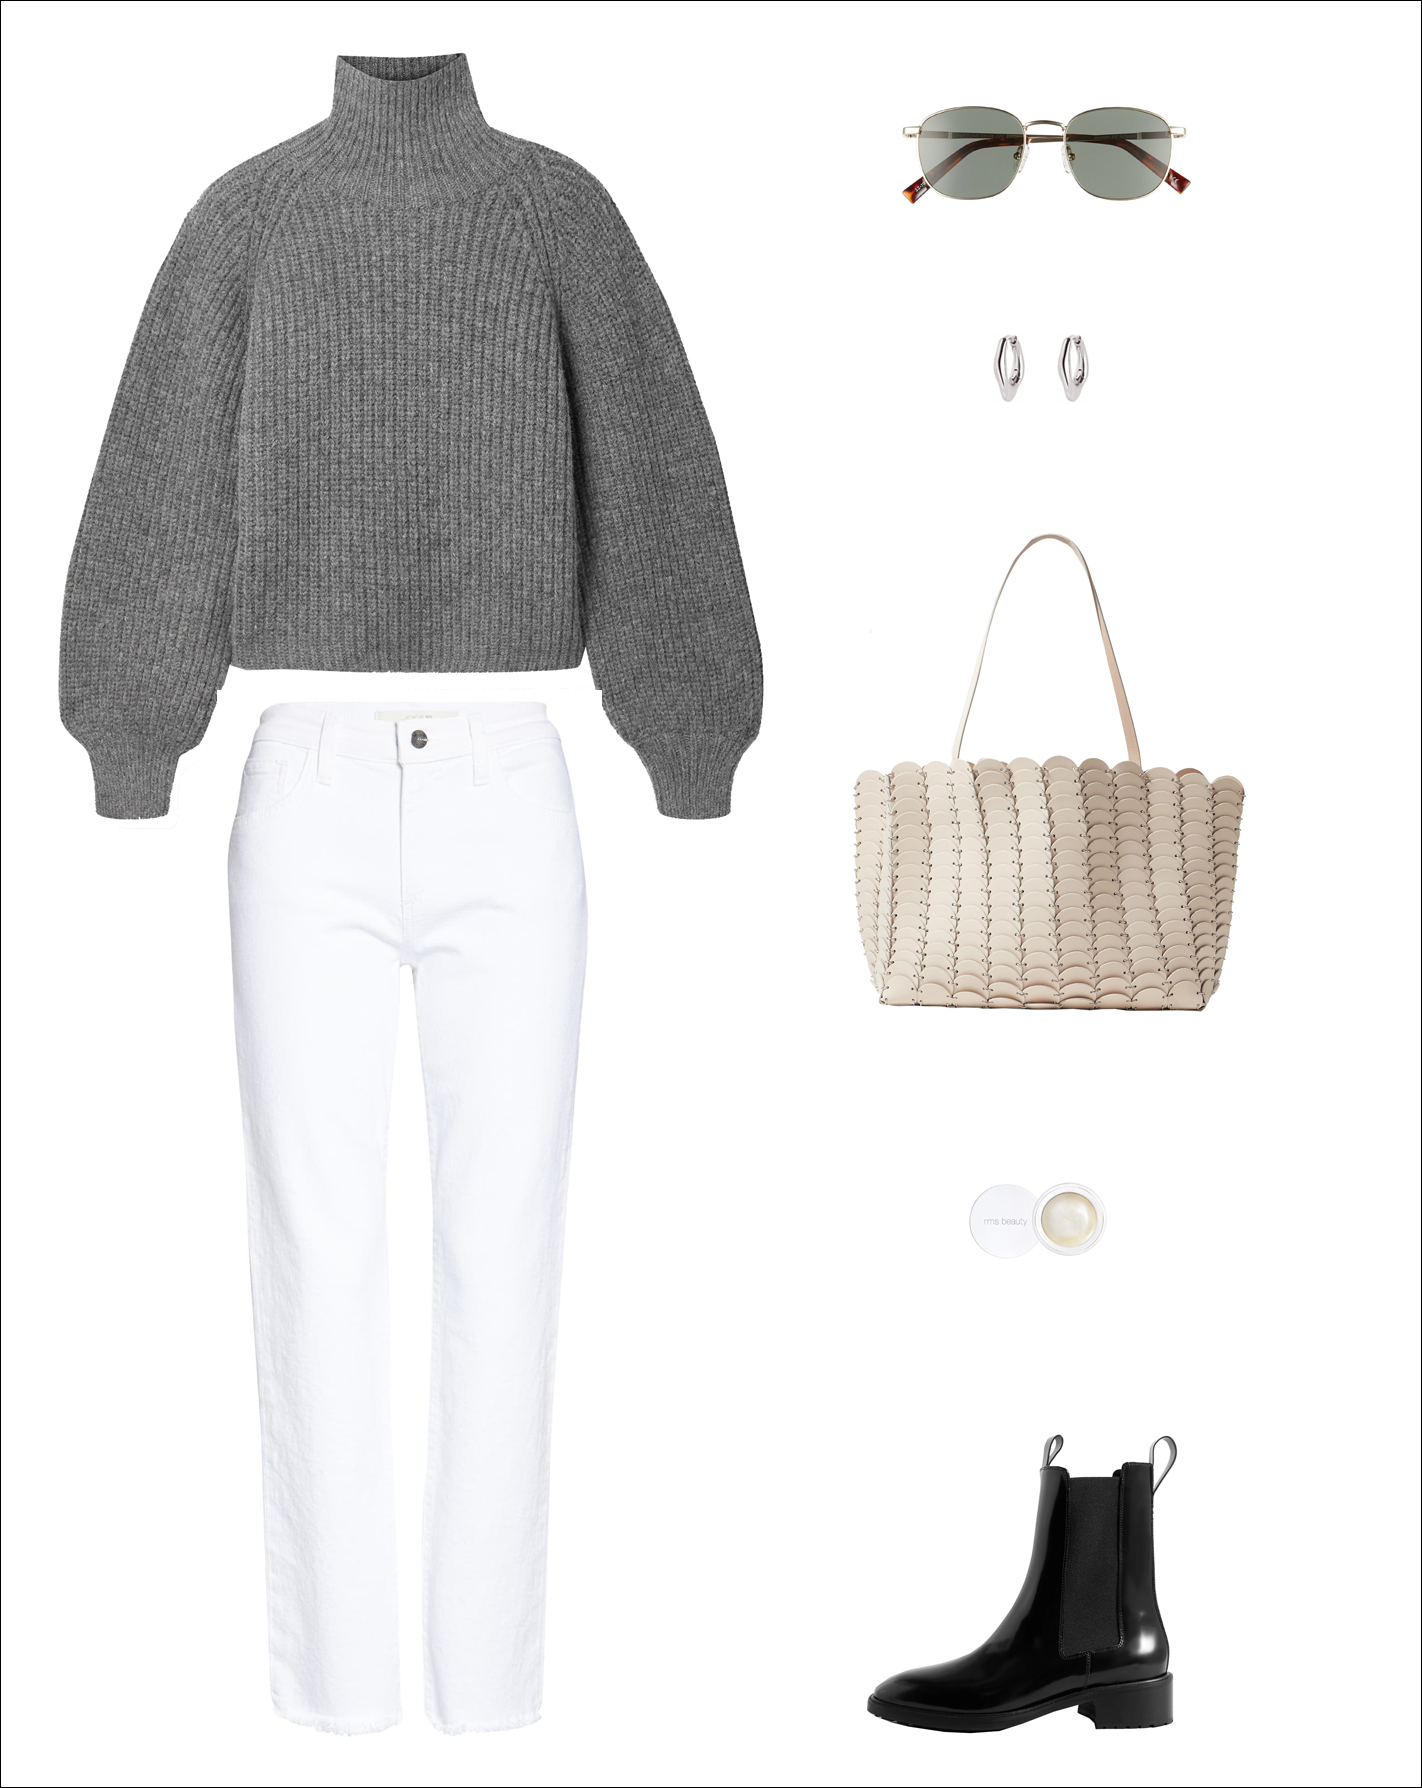 A Stylish Yet Practical Way to Wear Your White Jeans Now